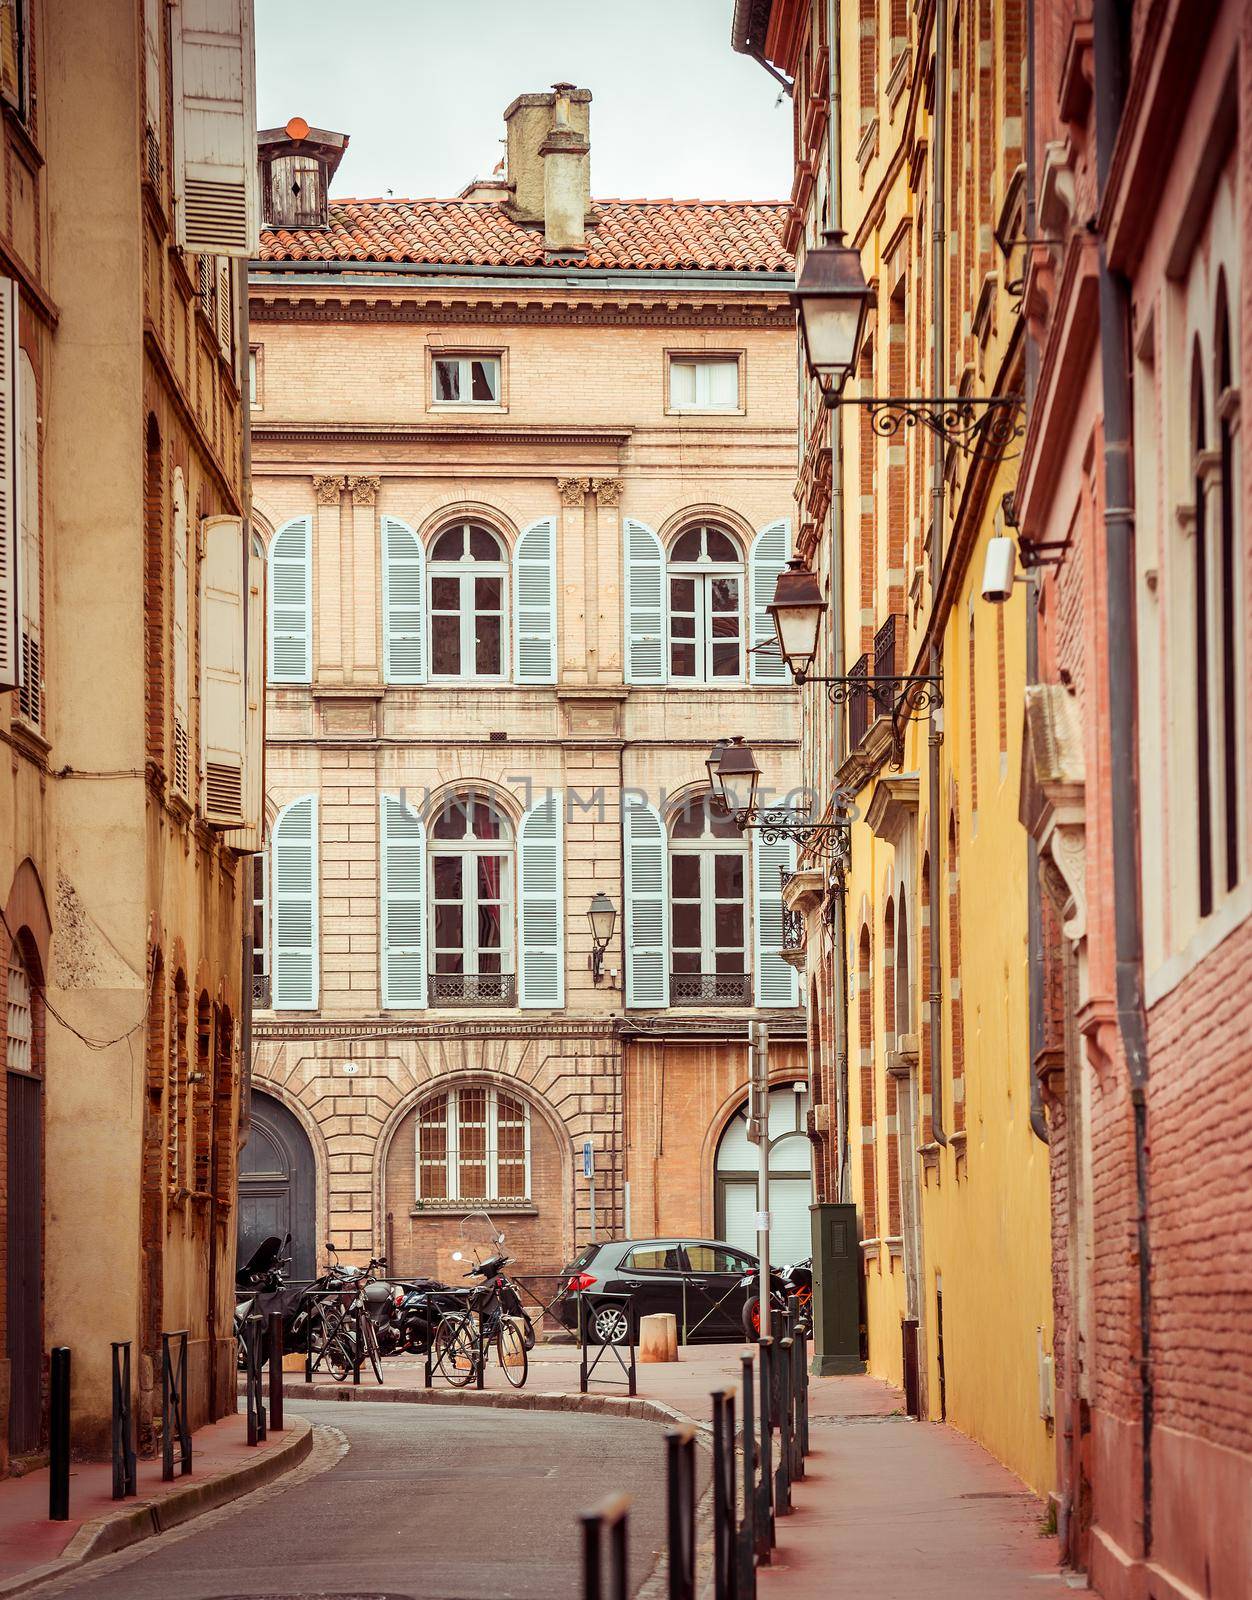 Narrow historic street with old buildings in Toulouse, France